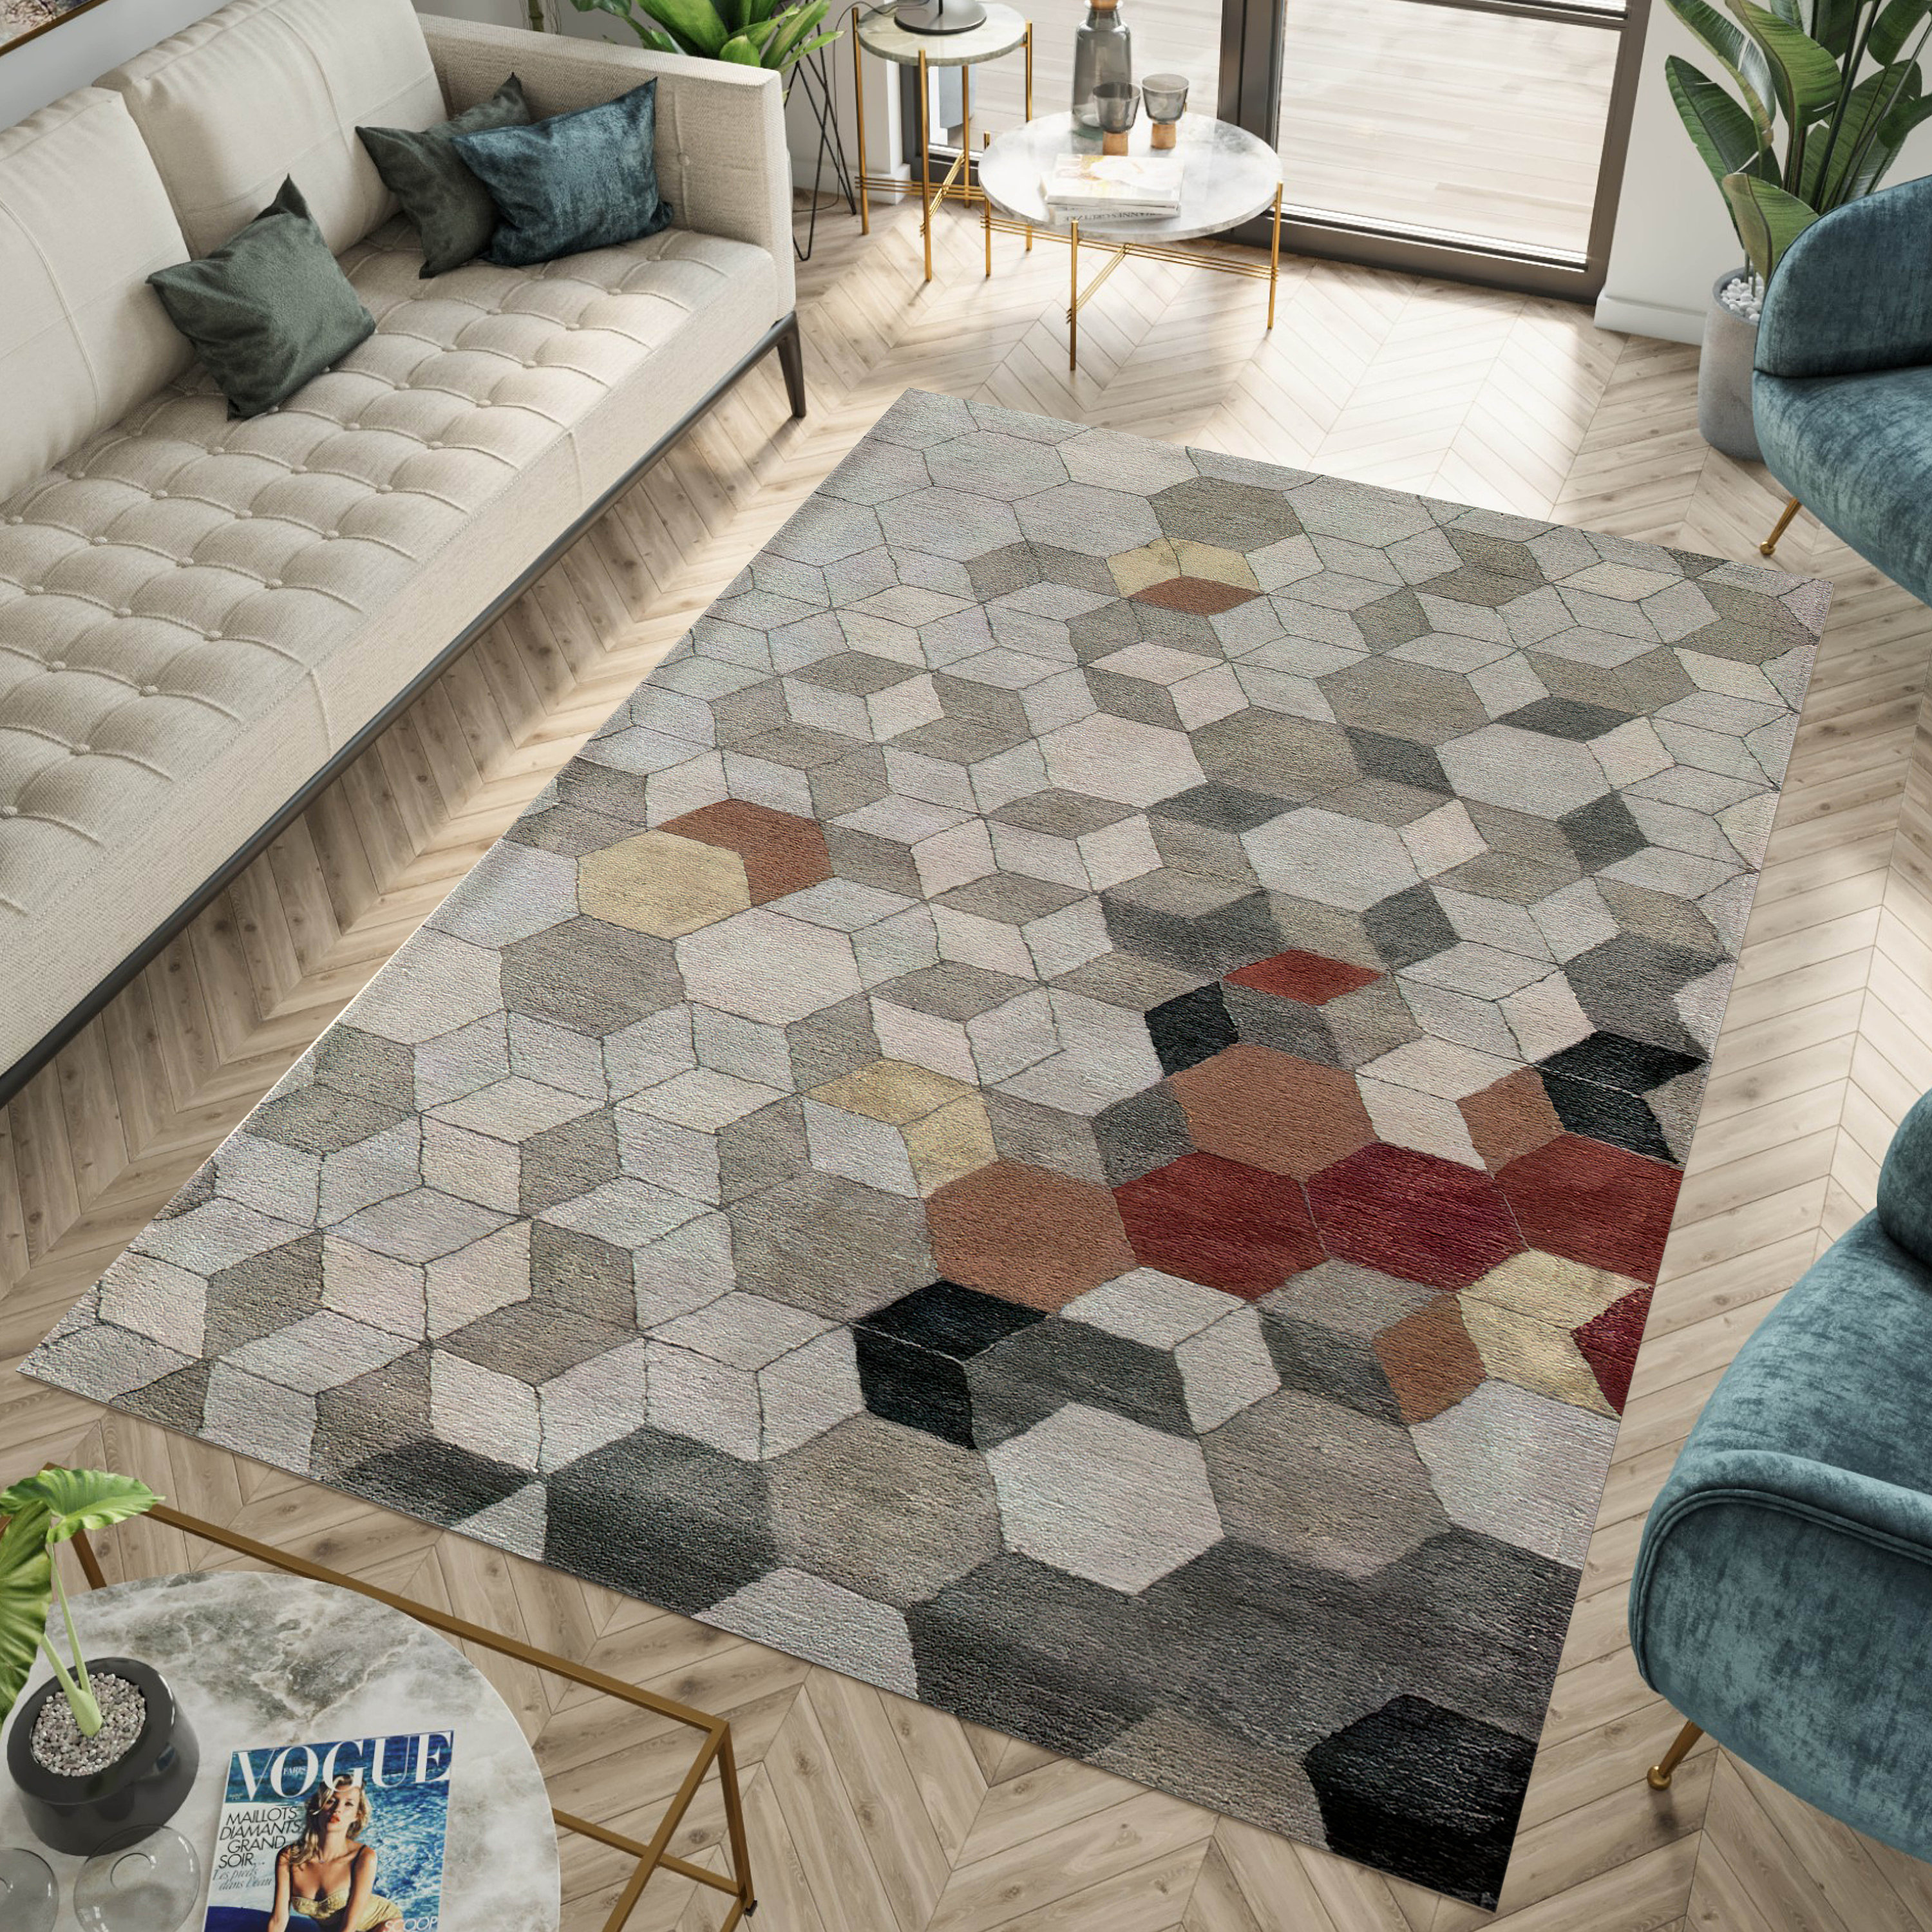 Hexagon Geometric Multicolor Colored Printed Accent Rug with Non-Slip Back, 2x4, Sold by at Home